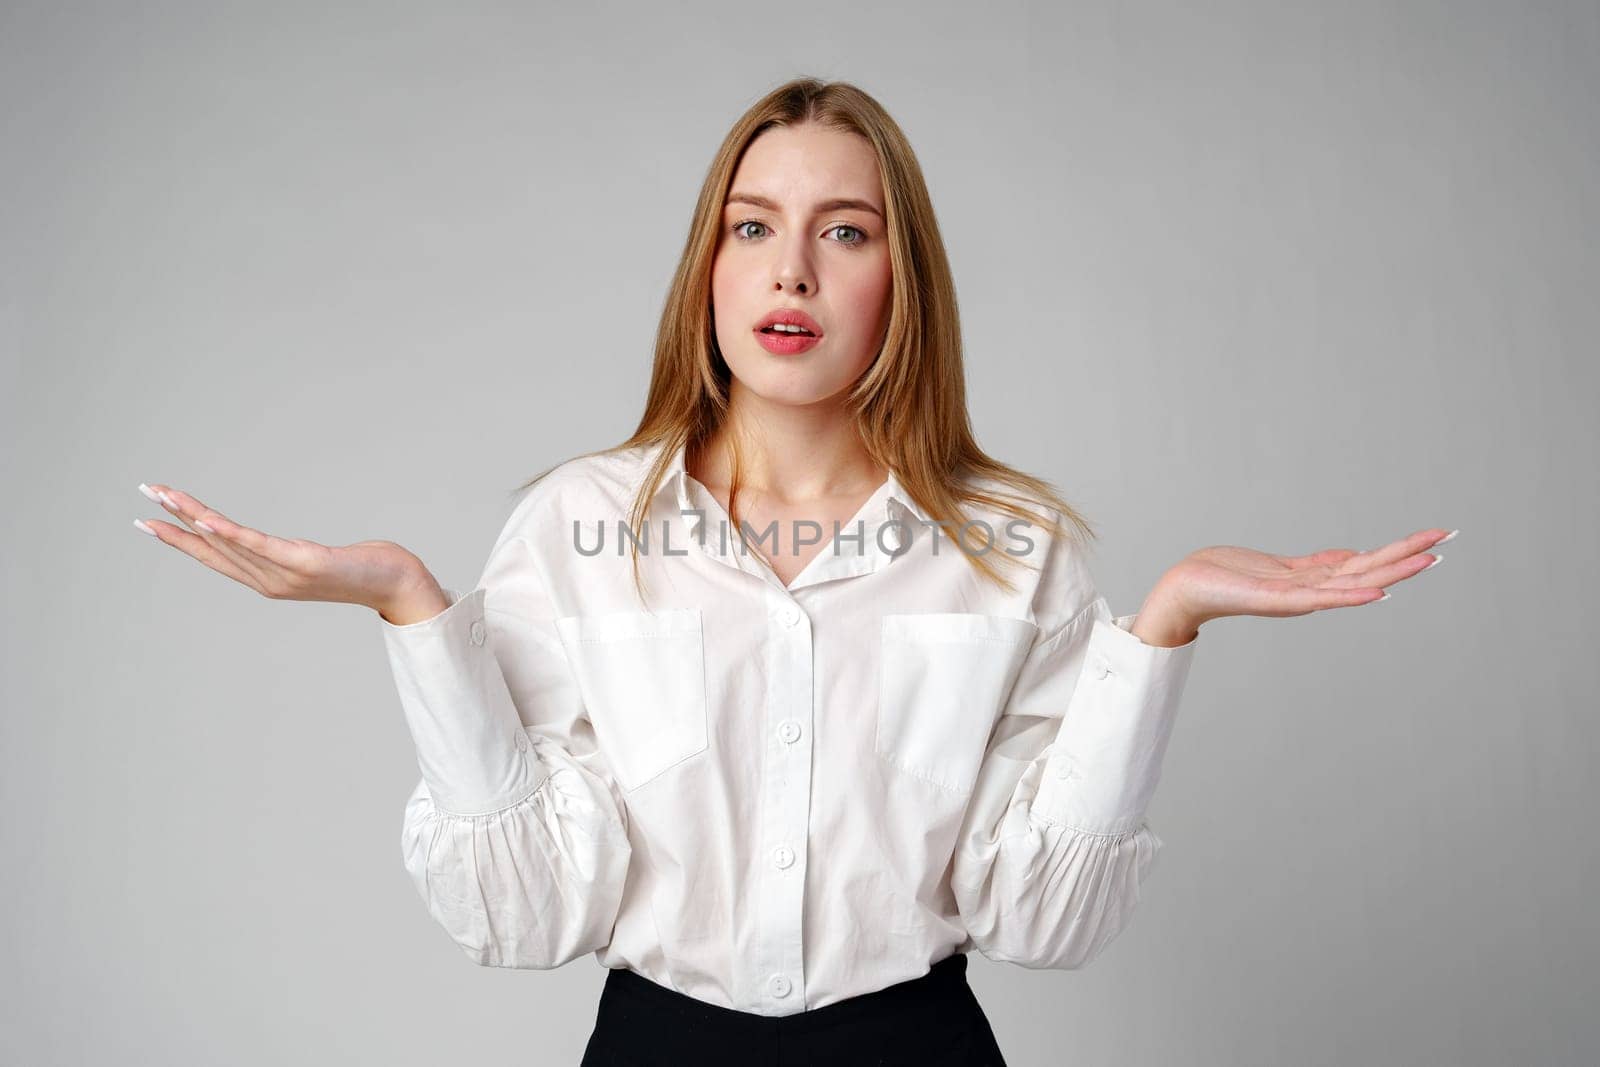 Woman in Formal Suit Holding Out Her Hands in studio